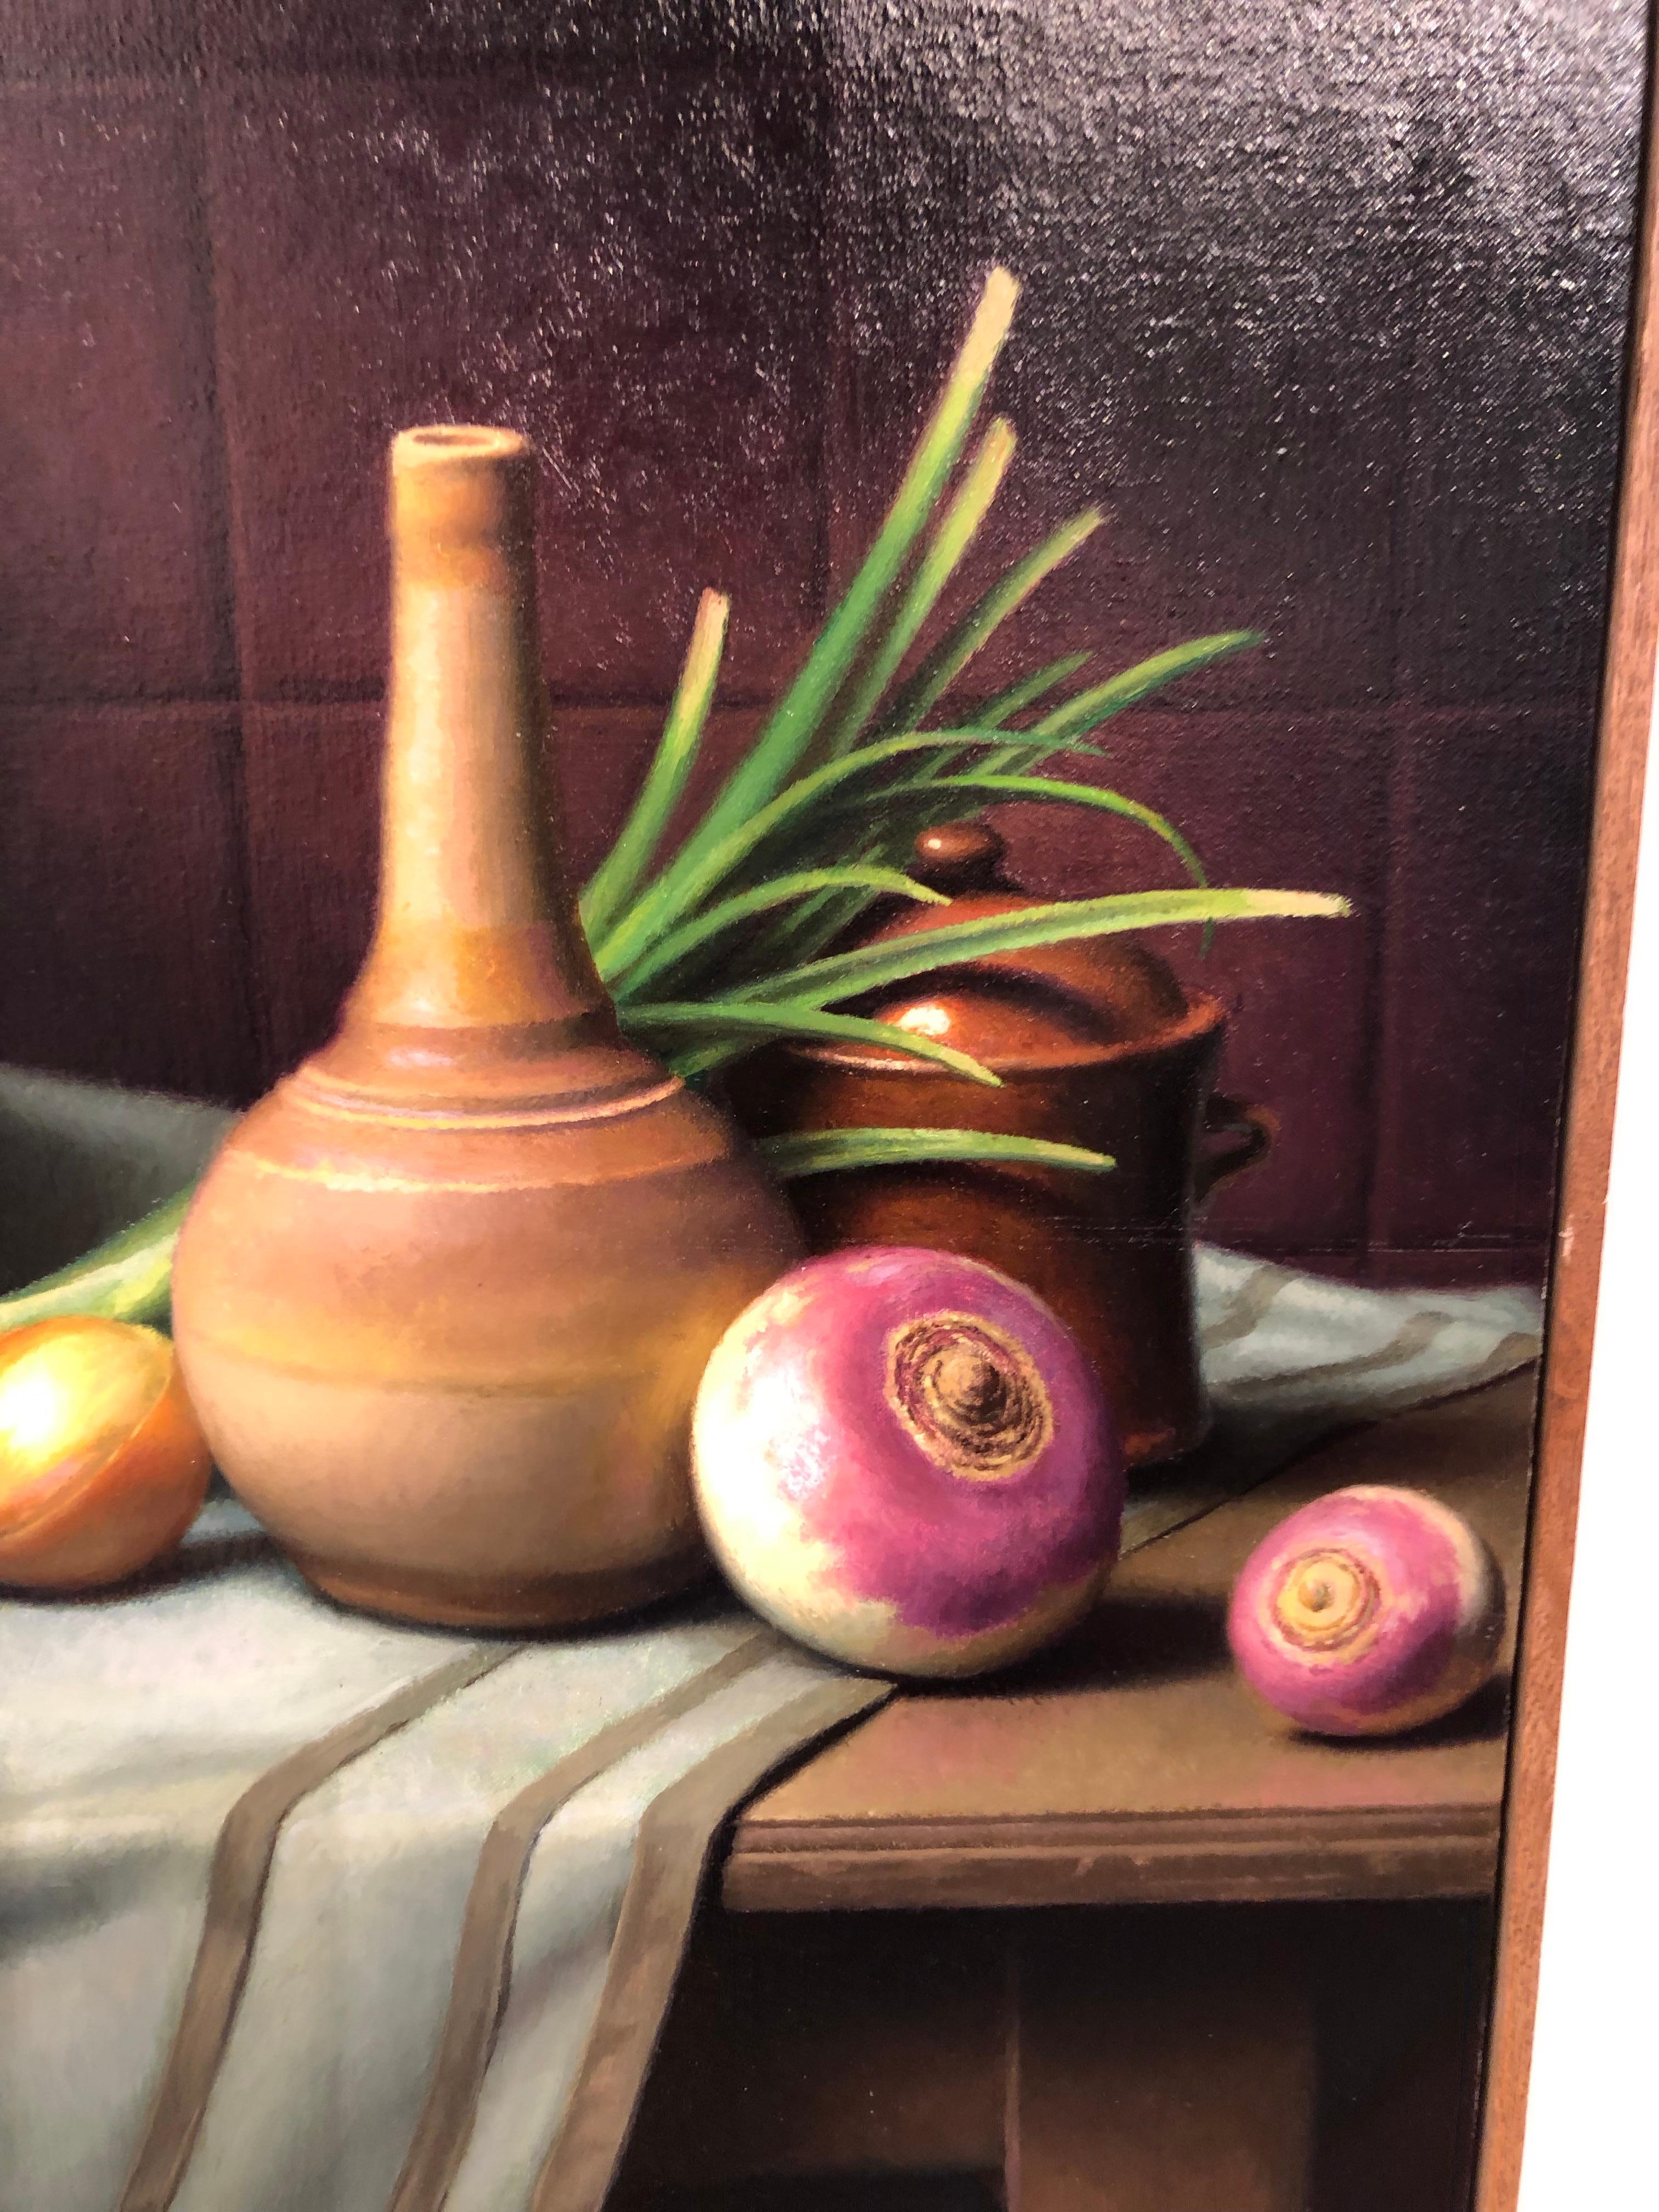 American Still Life with Turnips, Original Oil Painting on Canvas by Michael Chelich